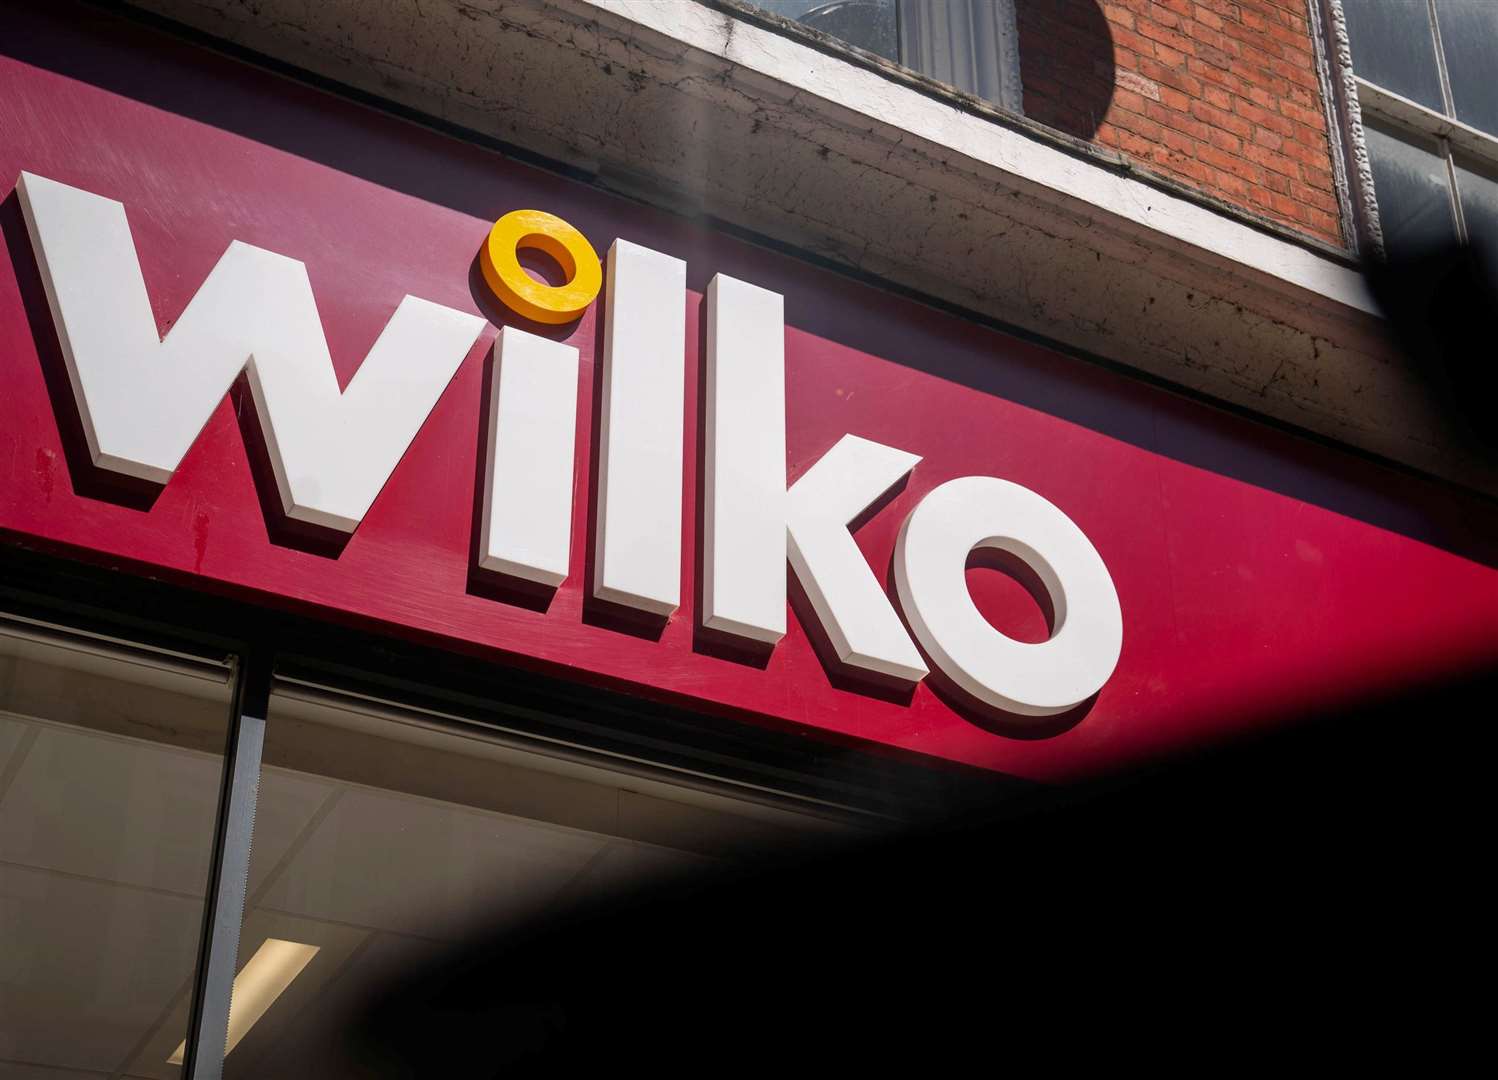 The Wilko brand is expected to disappear from the UK's high street in October, 2023. Picture: PA